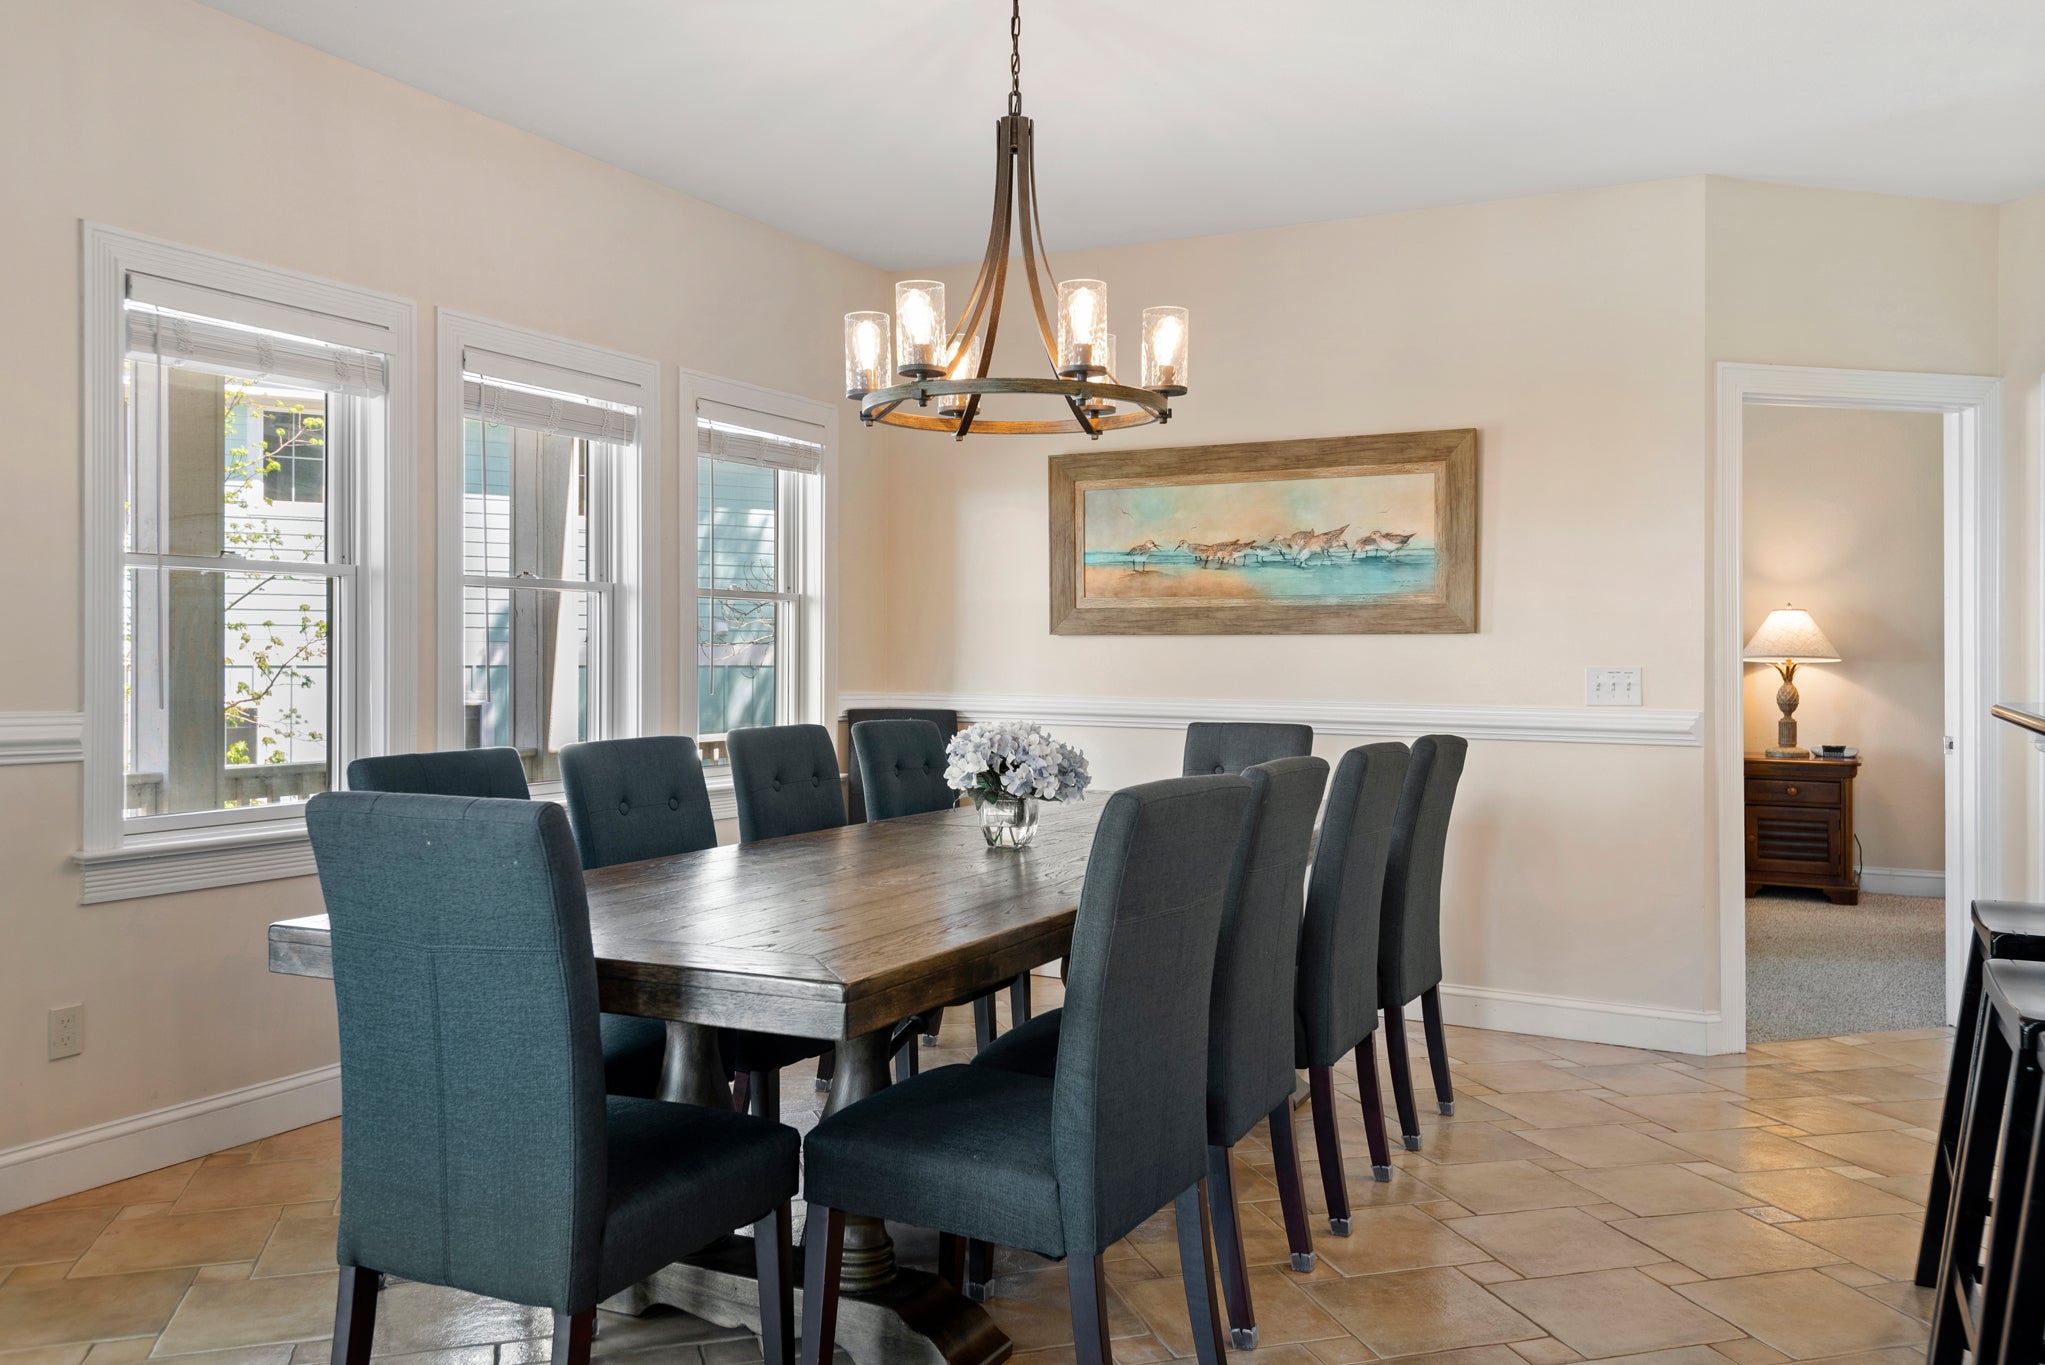 CC009: All About The View | Mid Level Dining Area